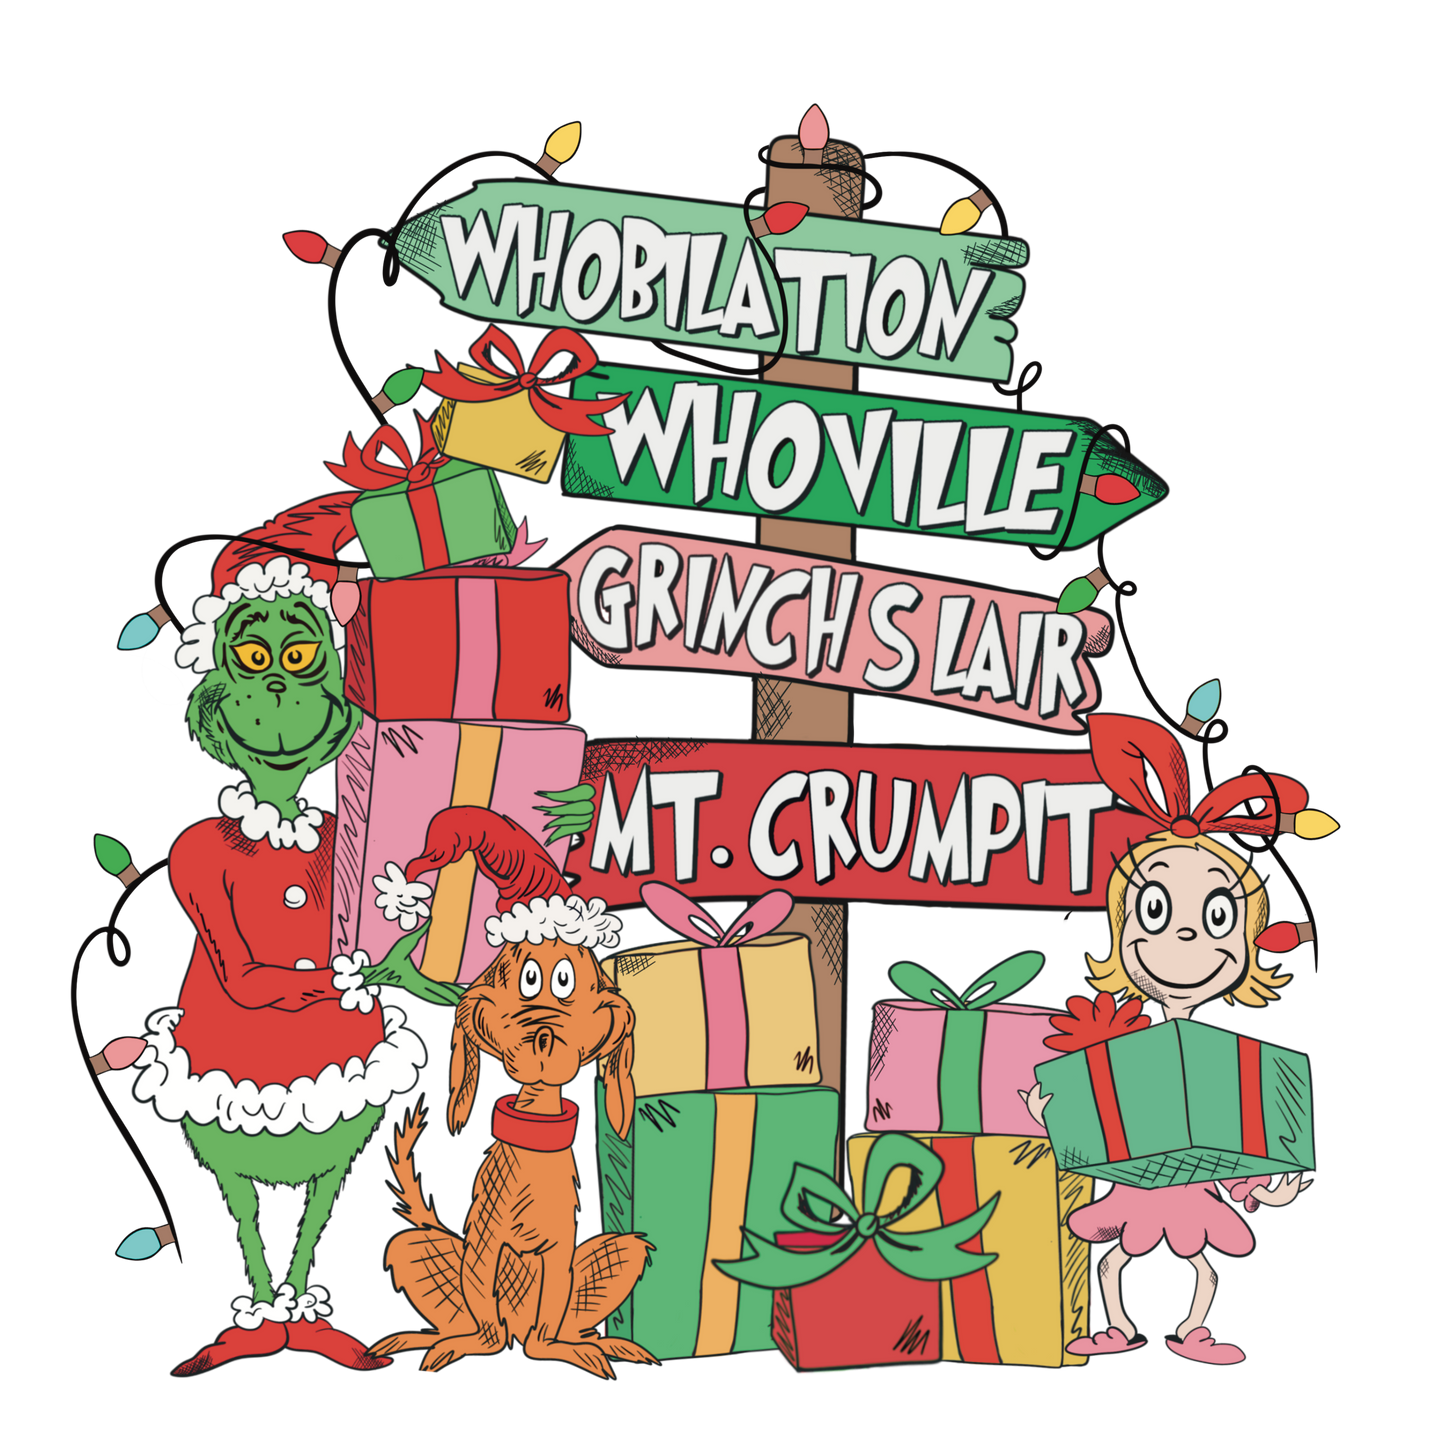 WHOBILATION WHOVILLE